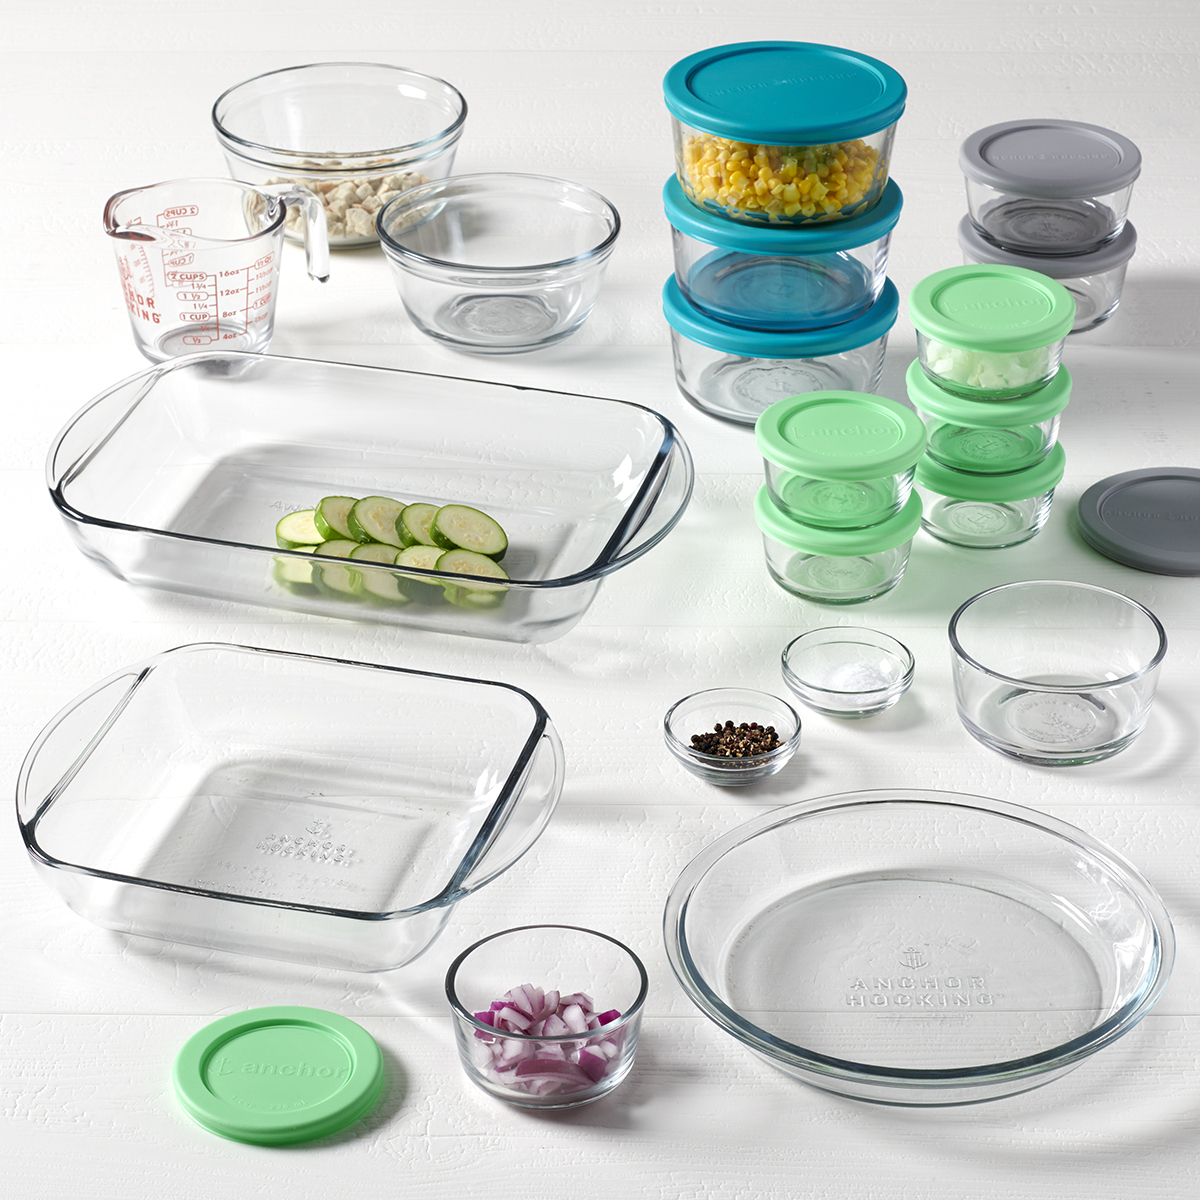 Anchor Hocking Glass Food Storage Containers & Glass Baking Dishes, 32 Piece Set - image 5 of 6